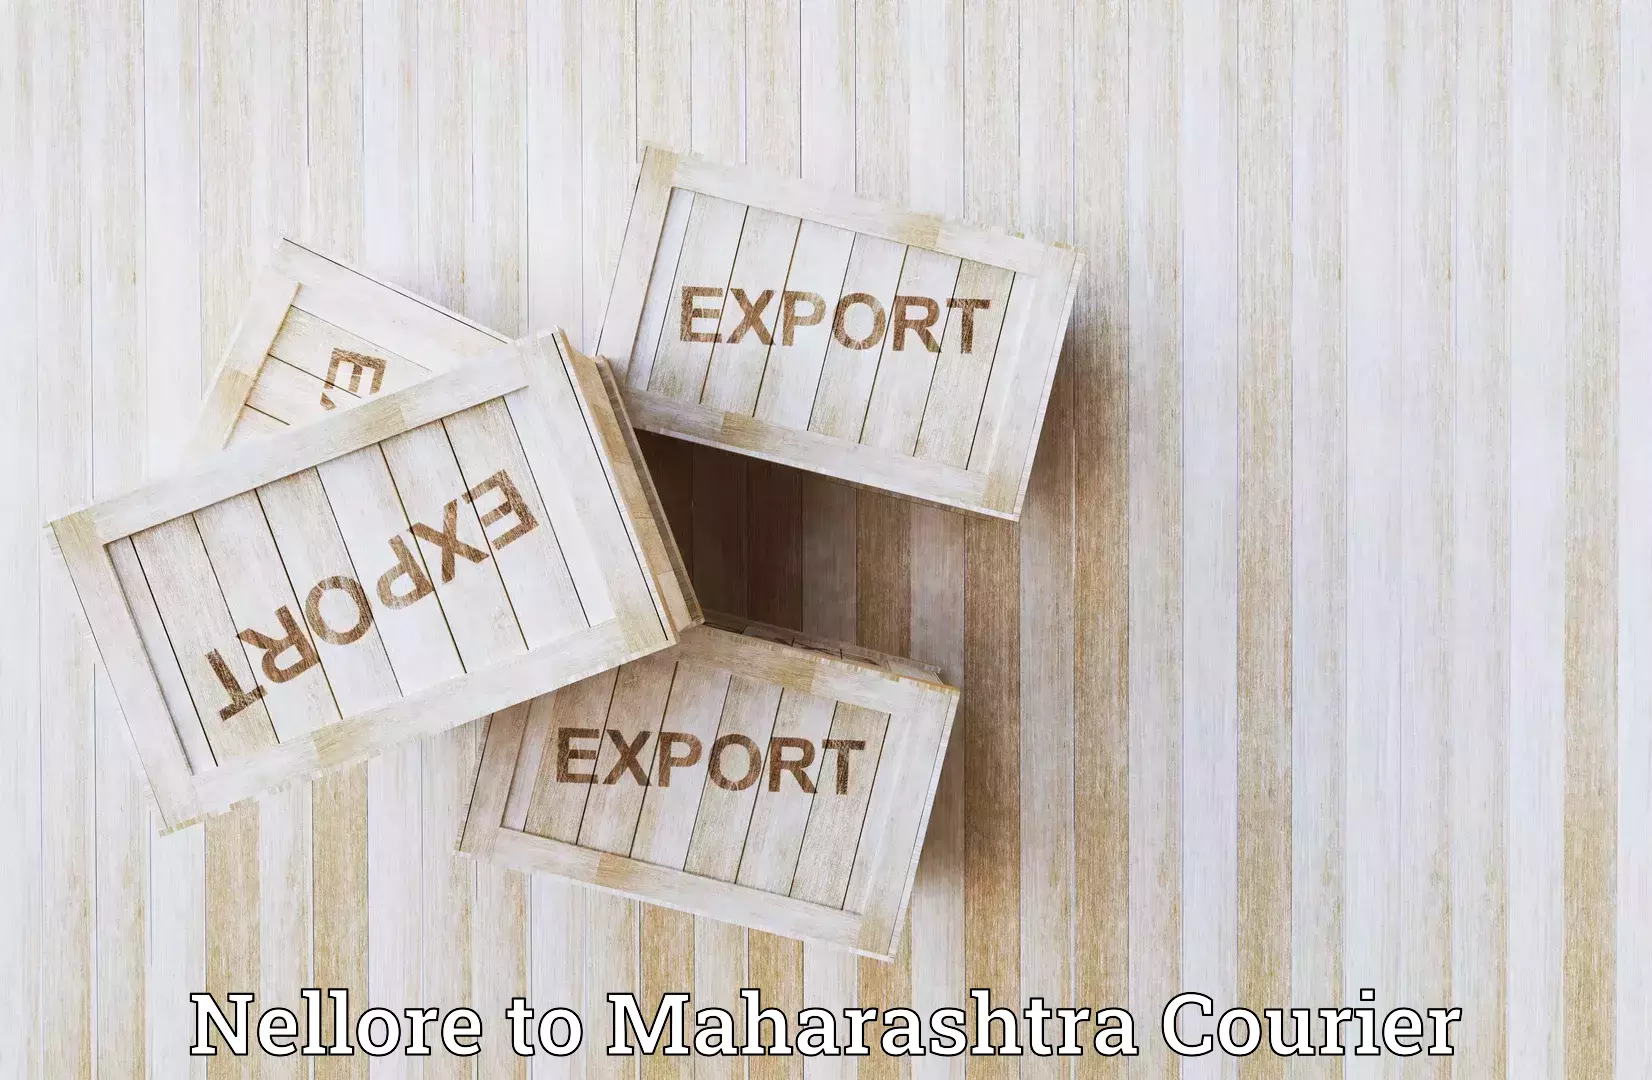 End-to-end delivery Nellore to Jawaharlal Nehru Port Nhava Sheva